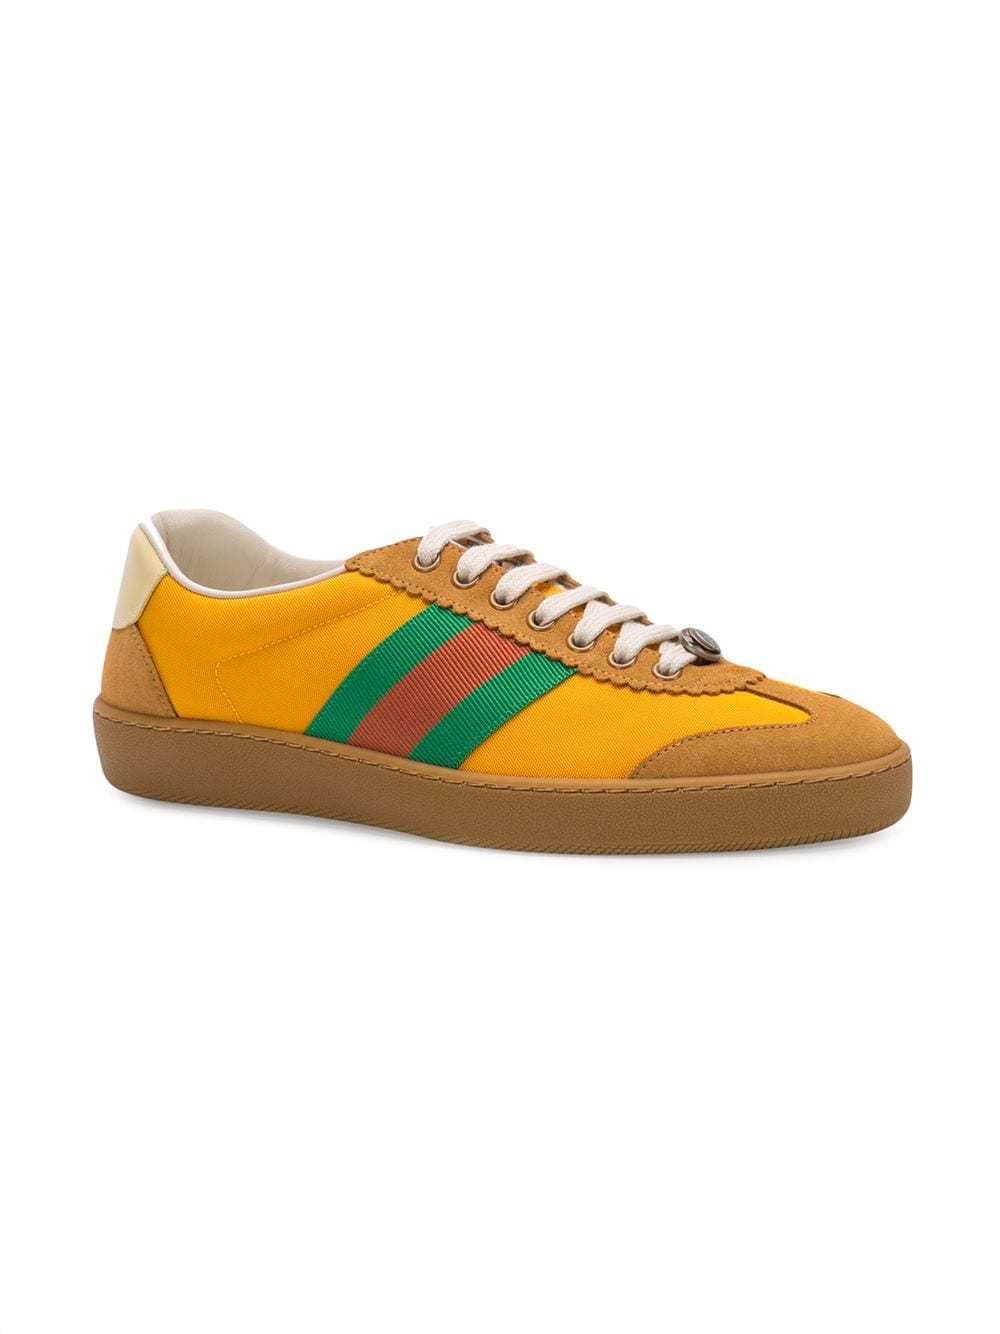 Gucci Ace Blade Yellow Men's - 576137 A38V0 7670 - US